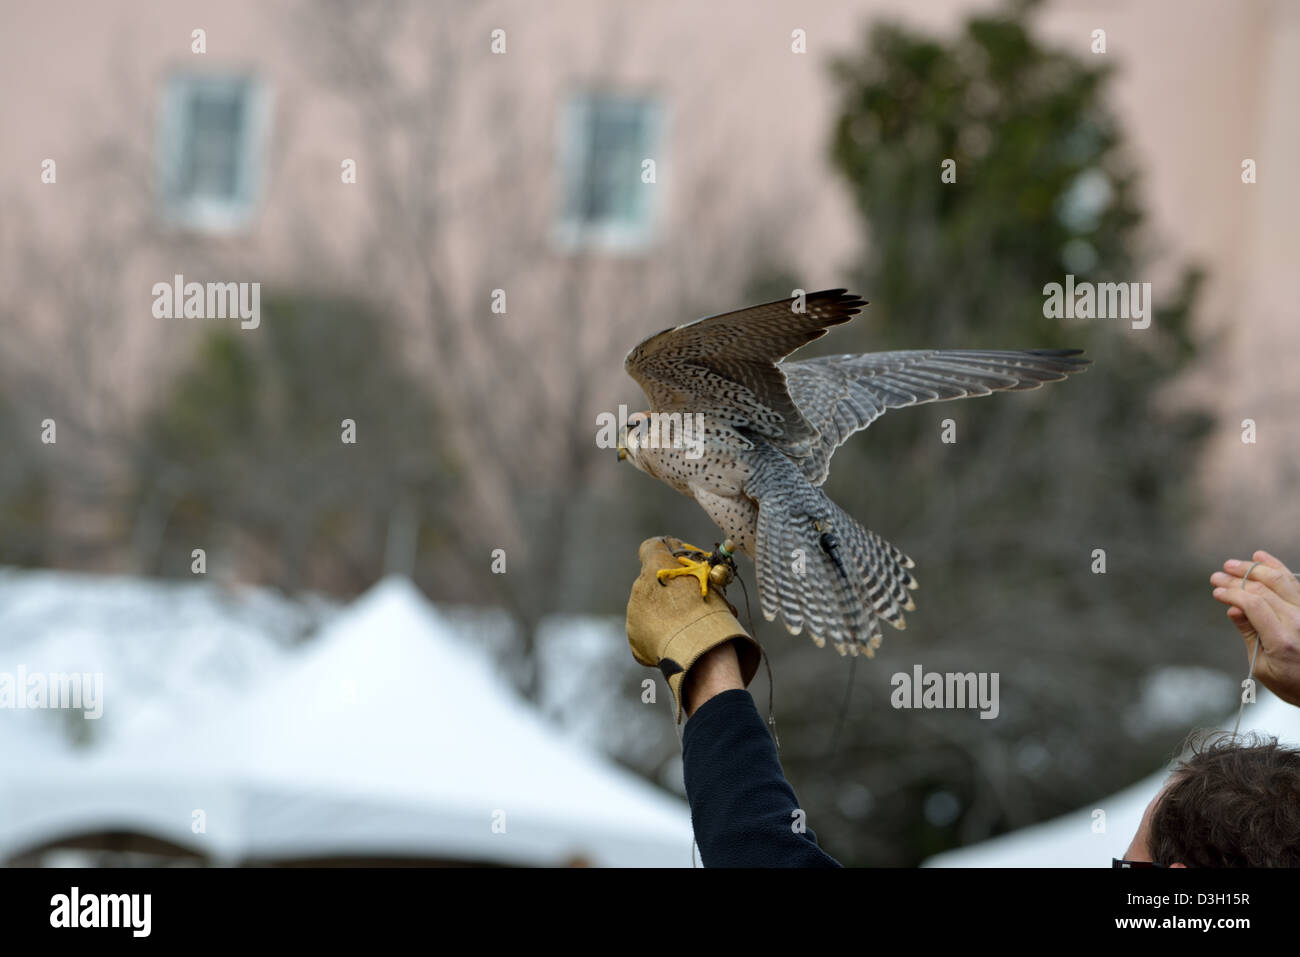 Falcon poised for lift off from trainer's gloved hand Stock Photo